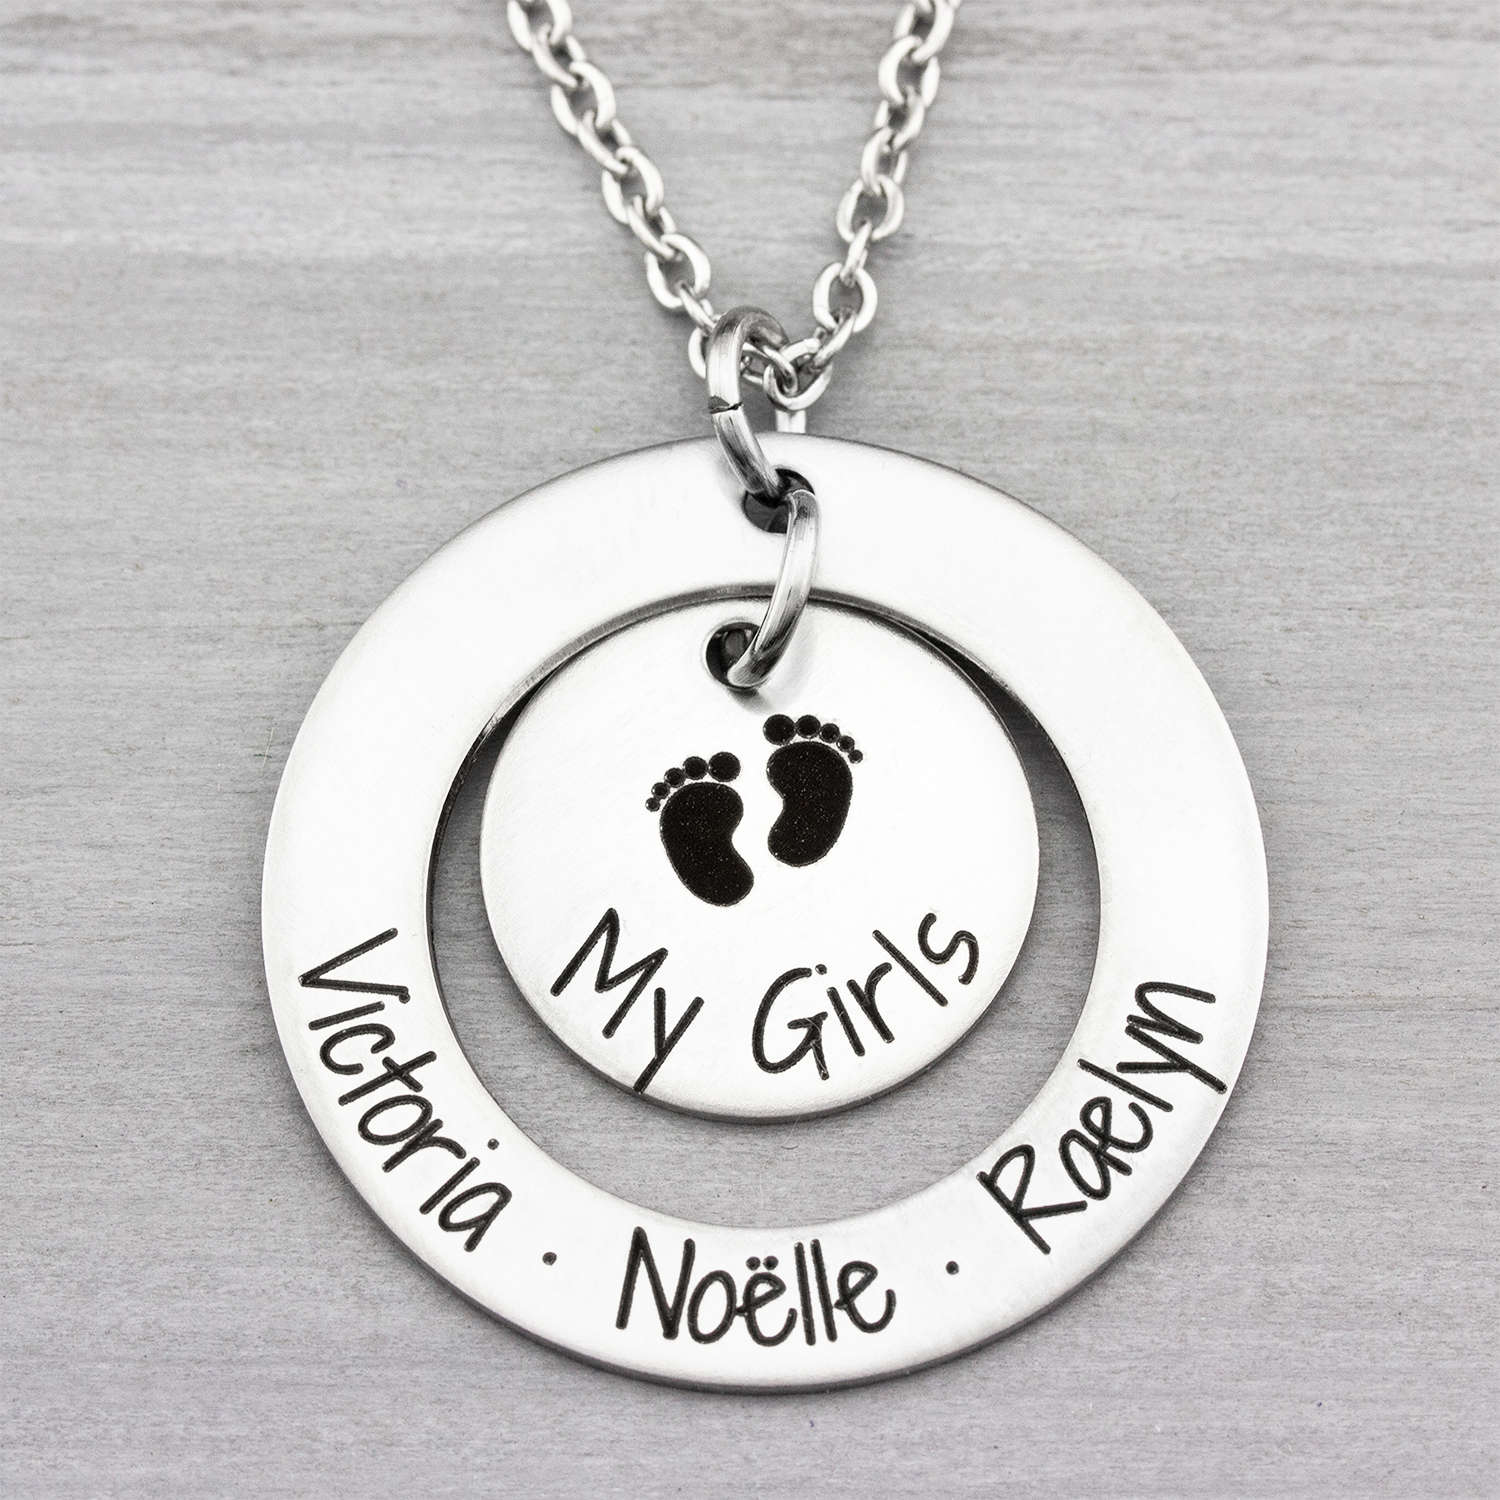 Kids Name Necklace, Personalized Necklace, Baby Necklace, Baby Gift,  Silver, Rose Gold and Gold, XW10 - Etsy